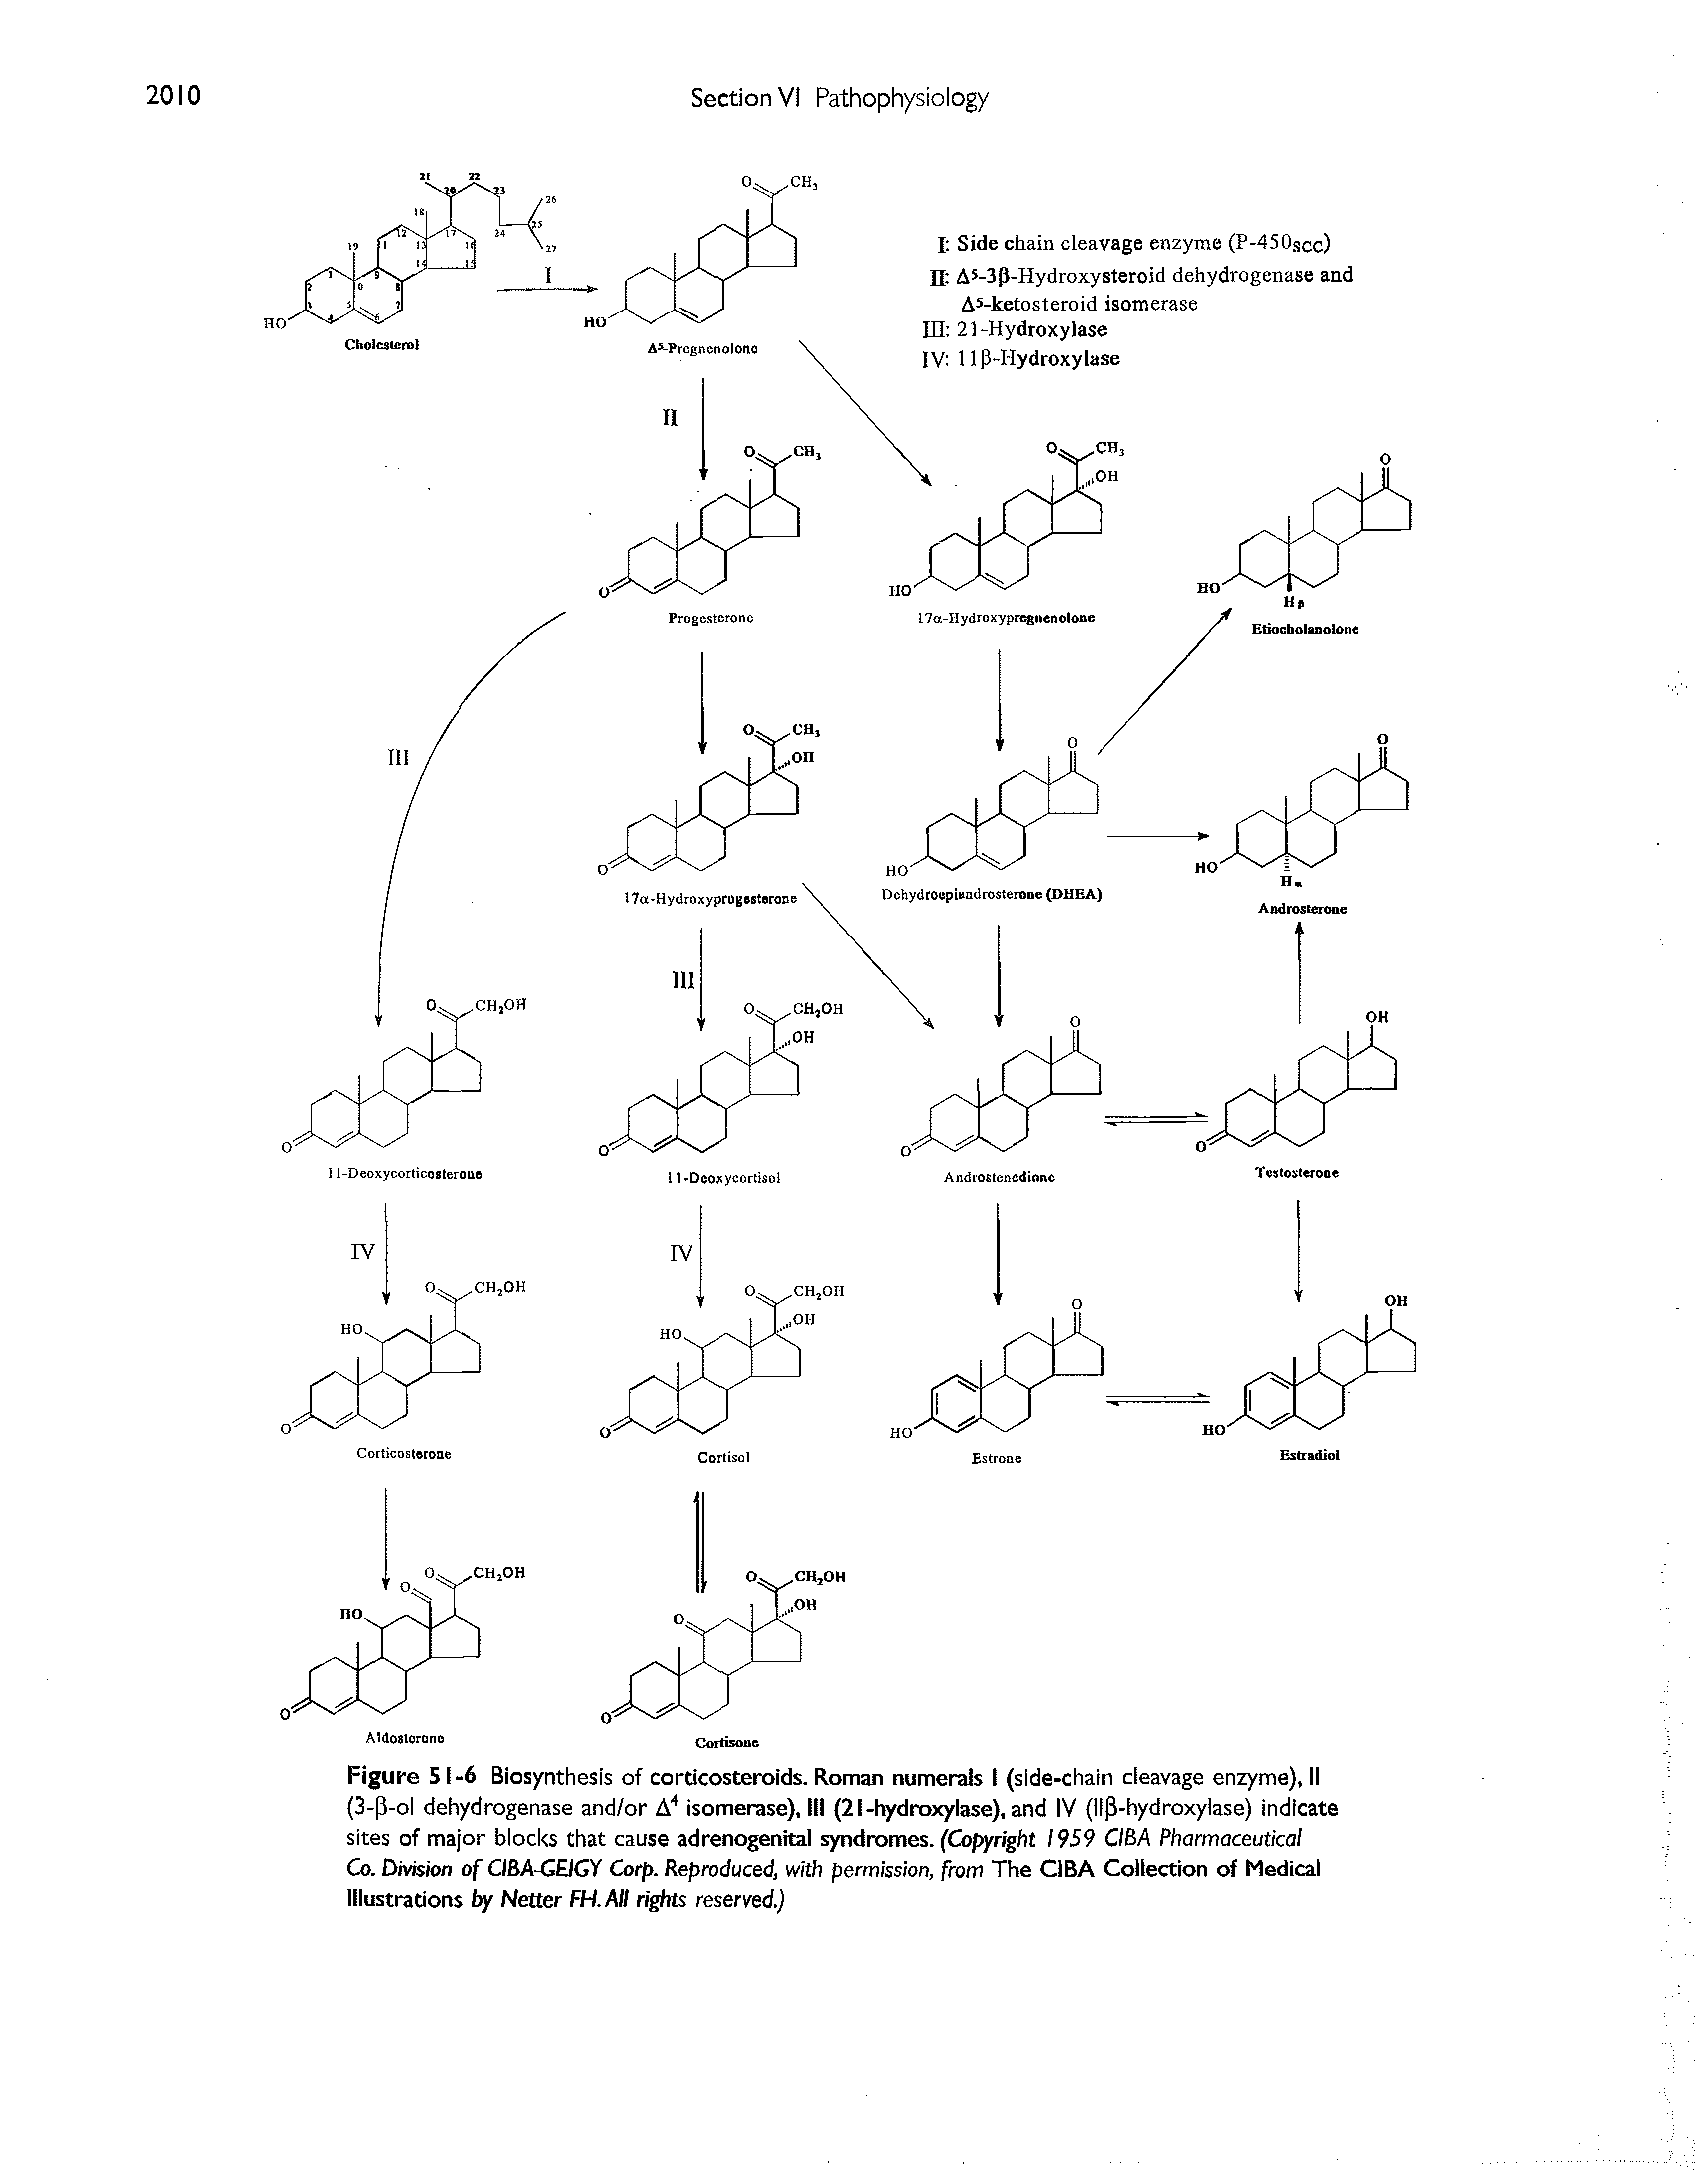 Figure 51-6 Biosynthesis of corticosteroids. Roman numerals I (side-chain cleavage enzyme), II (3-p-ol dehydrogenase and/or A" isomerase), III (21-hydroxylase), and IV (lip-hydroxyiase) indicate sites of major blocks that cause adrenogenital syndromes. (Copyright 1959 CIBA Pharmaceutical Co. Division of CIBA-GEIGY Corp. Reproduced, with permission, from The CiBA Collection of Medical Illustrations by Netter FH.AII rights reserved.)...